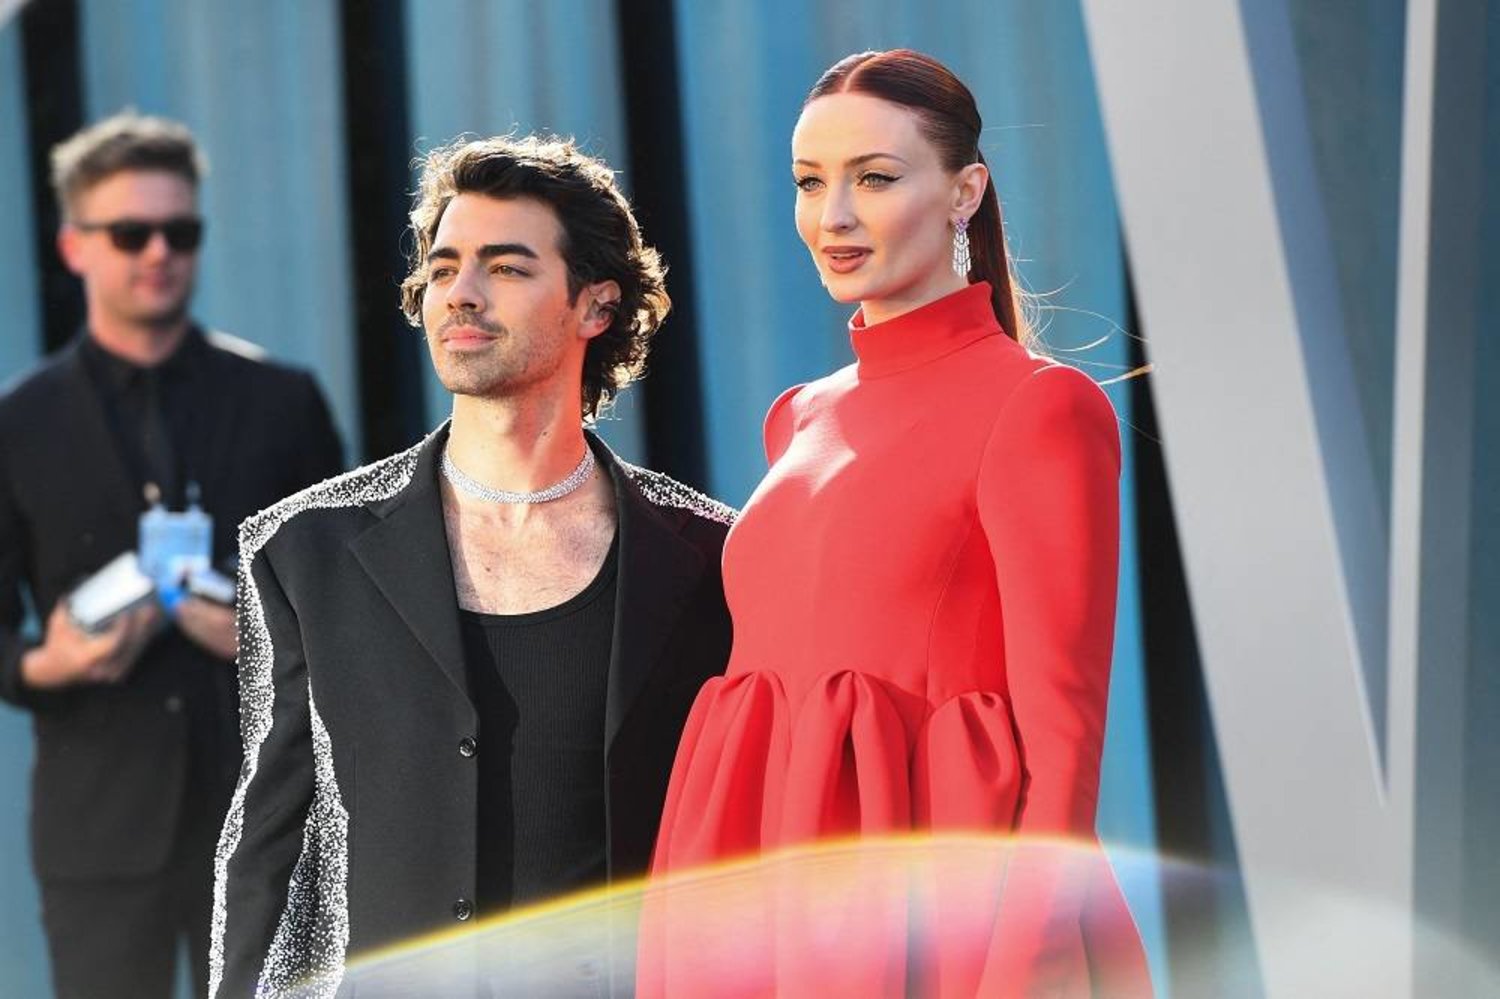 Joe Jonas and Sophie Turner attend the 2022 Vanity Fair Oscar Party following the 94th Oscars at the The Wallis Annenberg Center for the Performing Arts in Beverly Hills, California on March 27, 2022. (AFP)